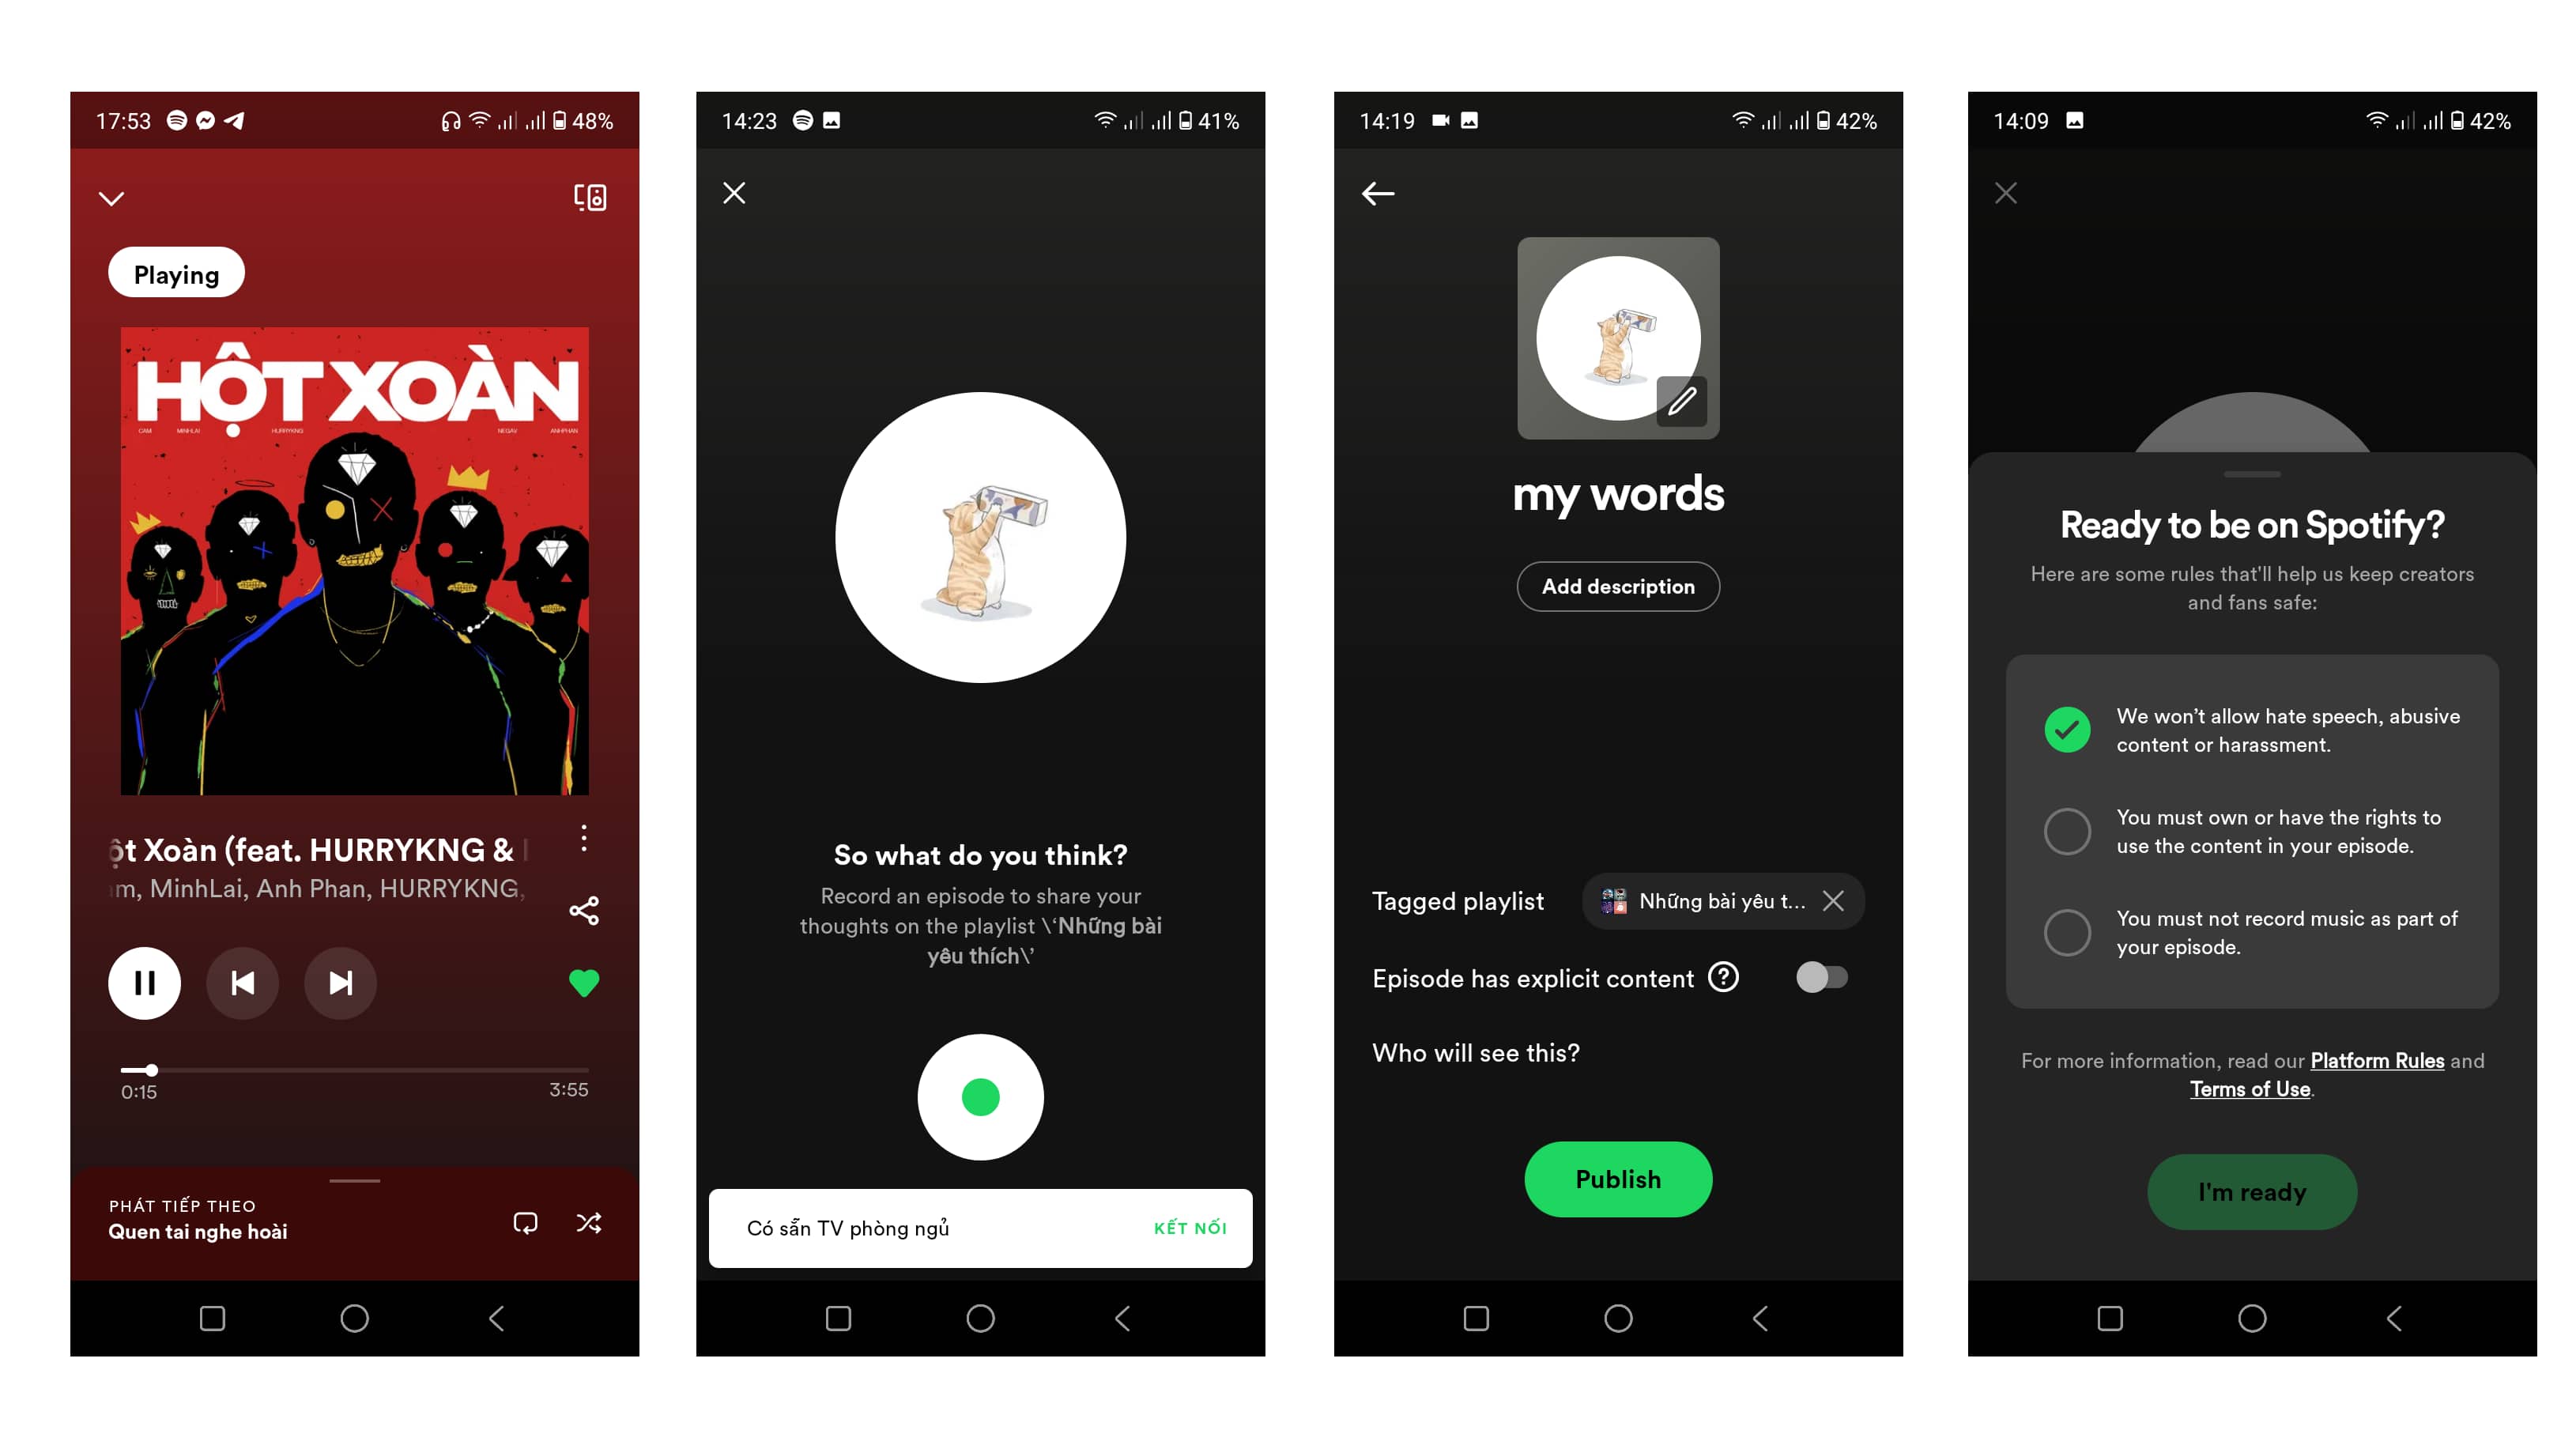 Android screenshots showcasing the ability to record audio reactions in the Spotify app